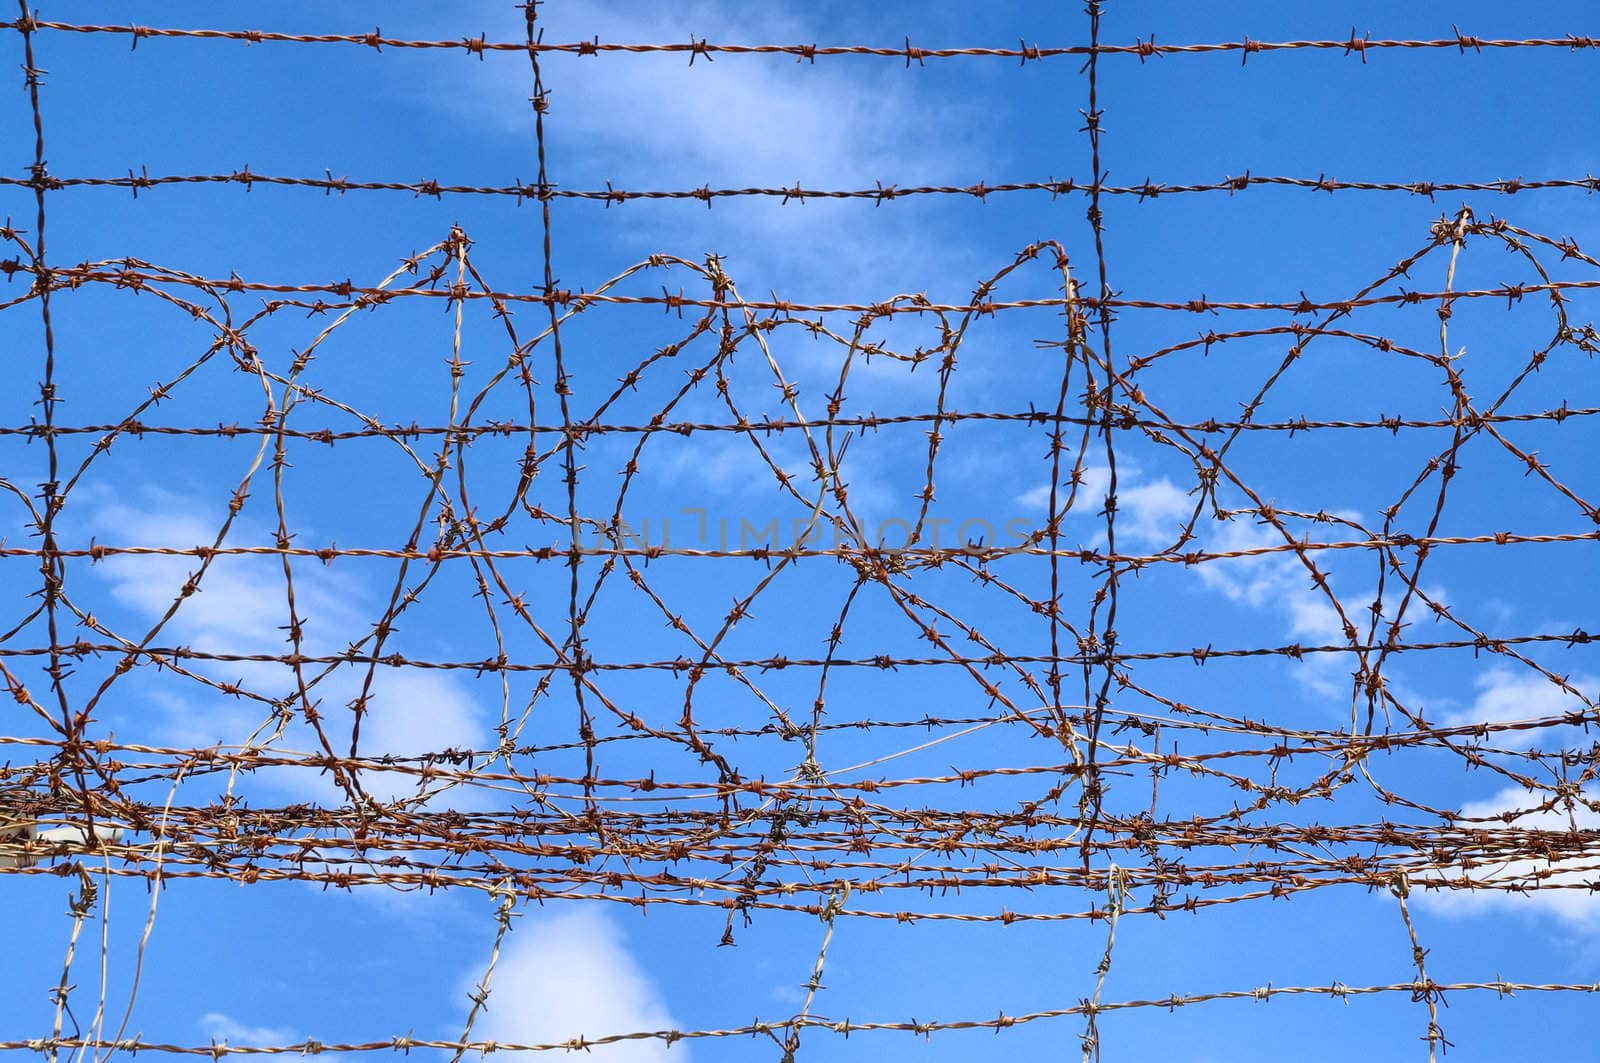 great image of barbed wire and blue sky